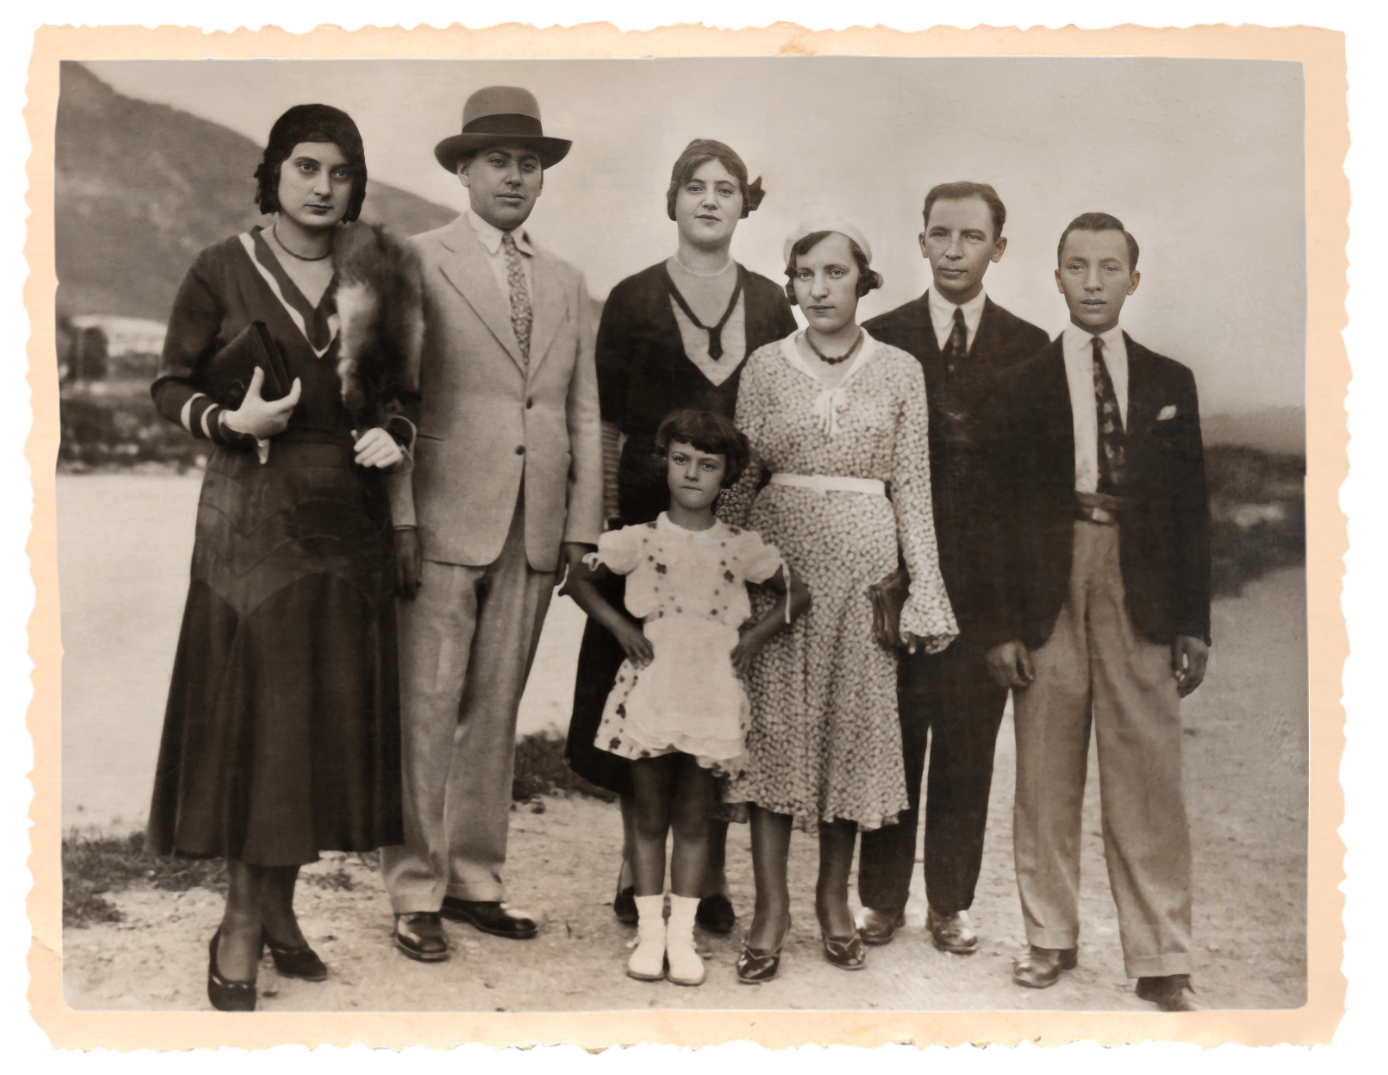 A family photo in sepia shows the Rosenthal family